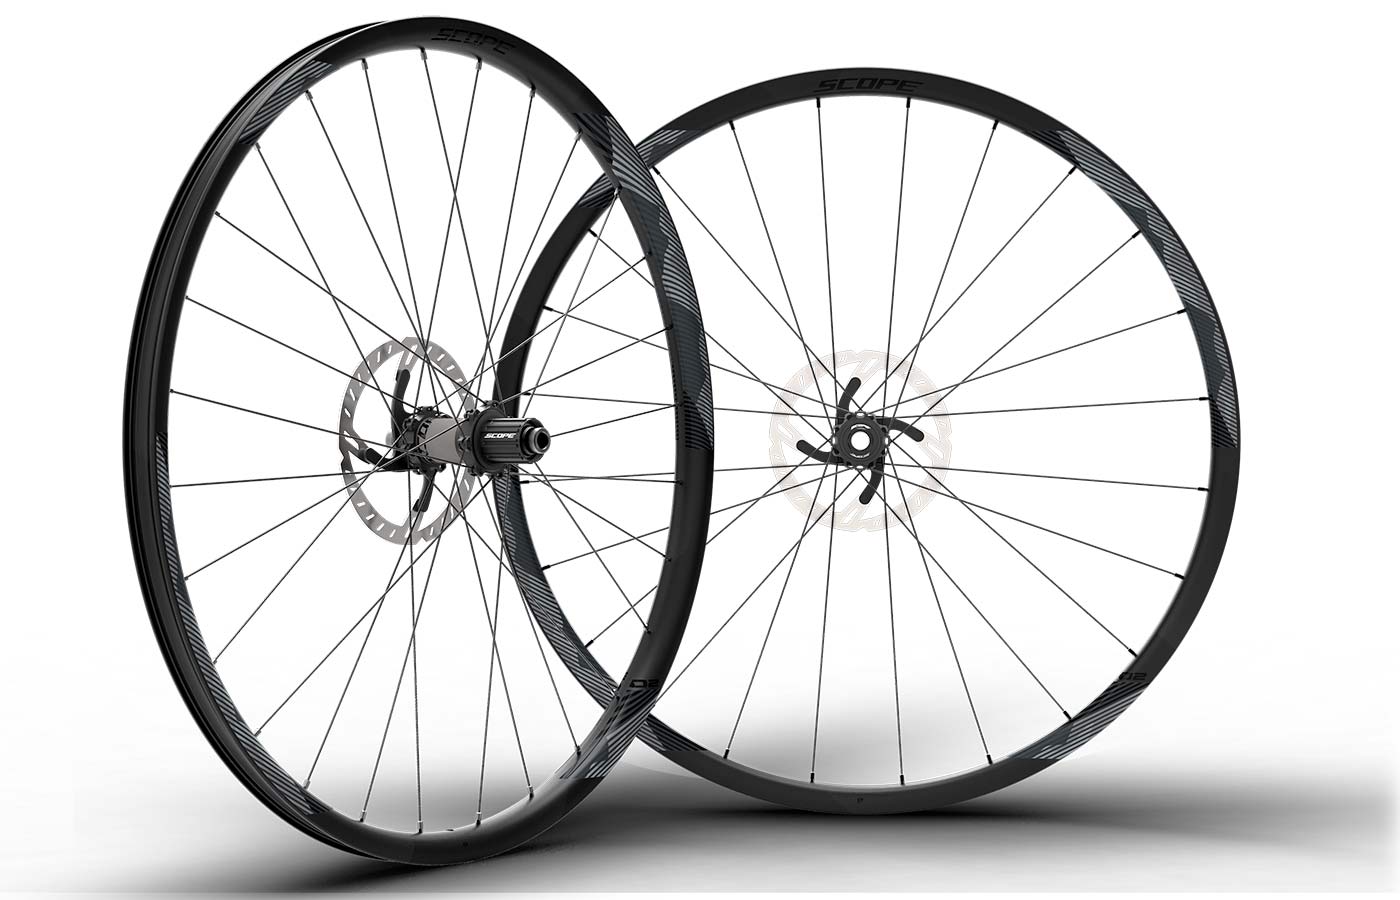 EB17: Scope O2 rolls off-road with lightweight carbon tubeless XC mountain bike wheels